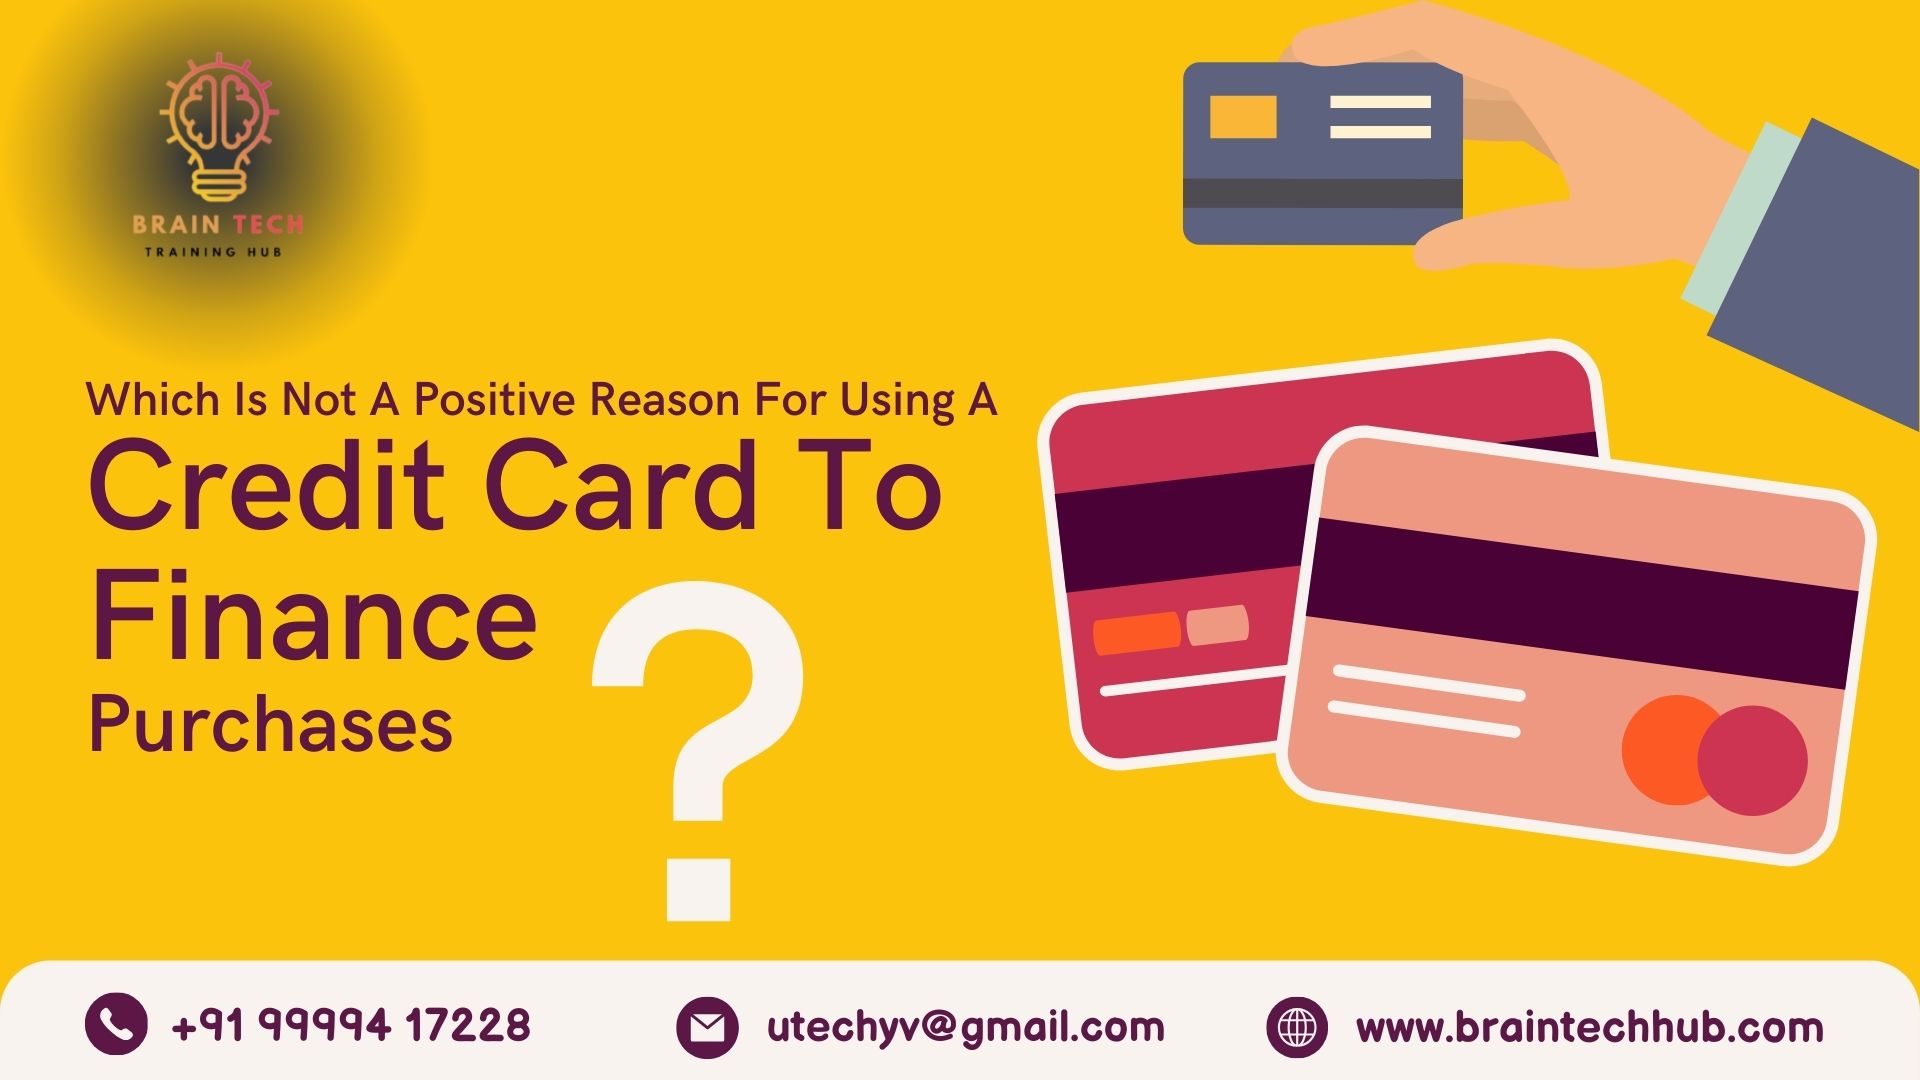 Which Is Not A Positive Reason For Using A Credit Card To Finance Purchases (1)